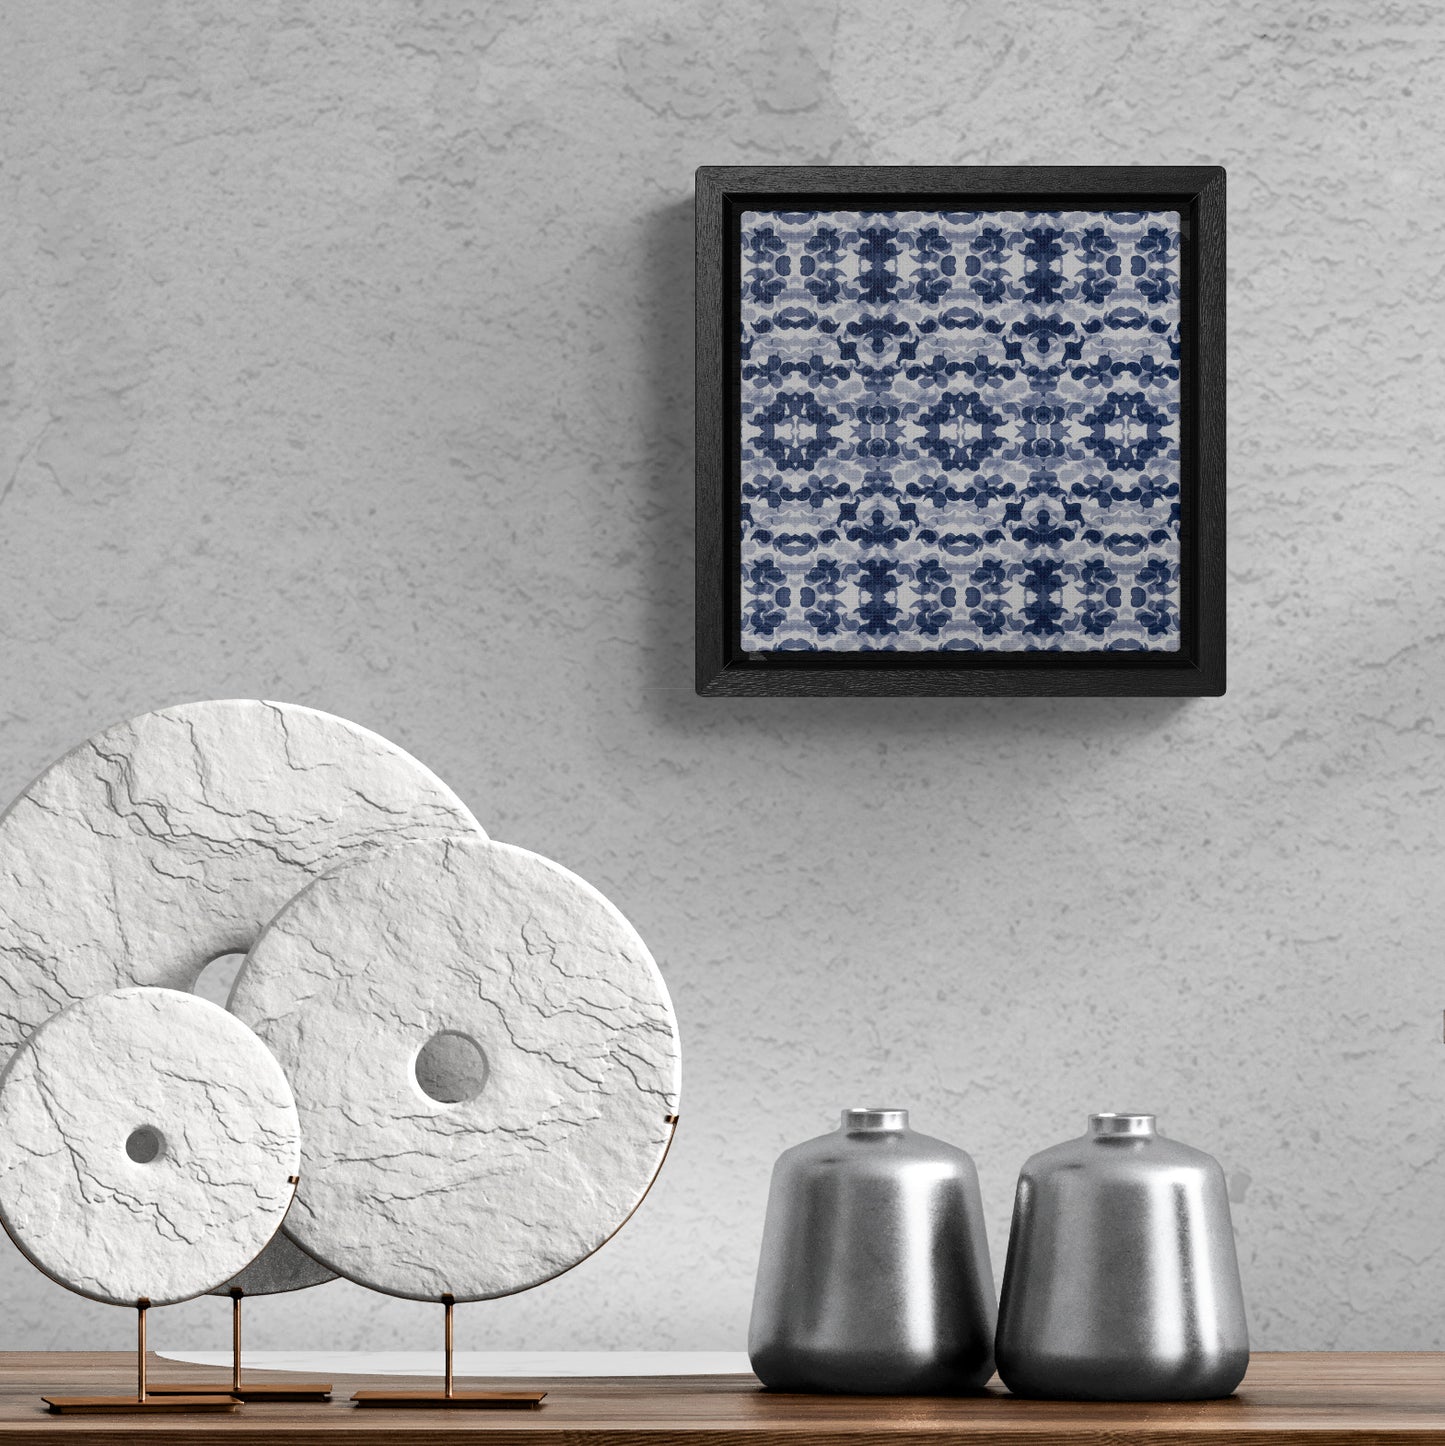 Smalled framed canvas featuring a navy blue paisley pattern hanging above a table with small sculptures